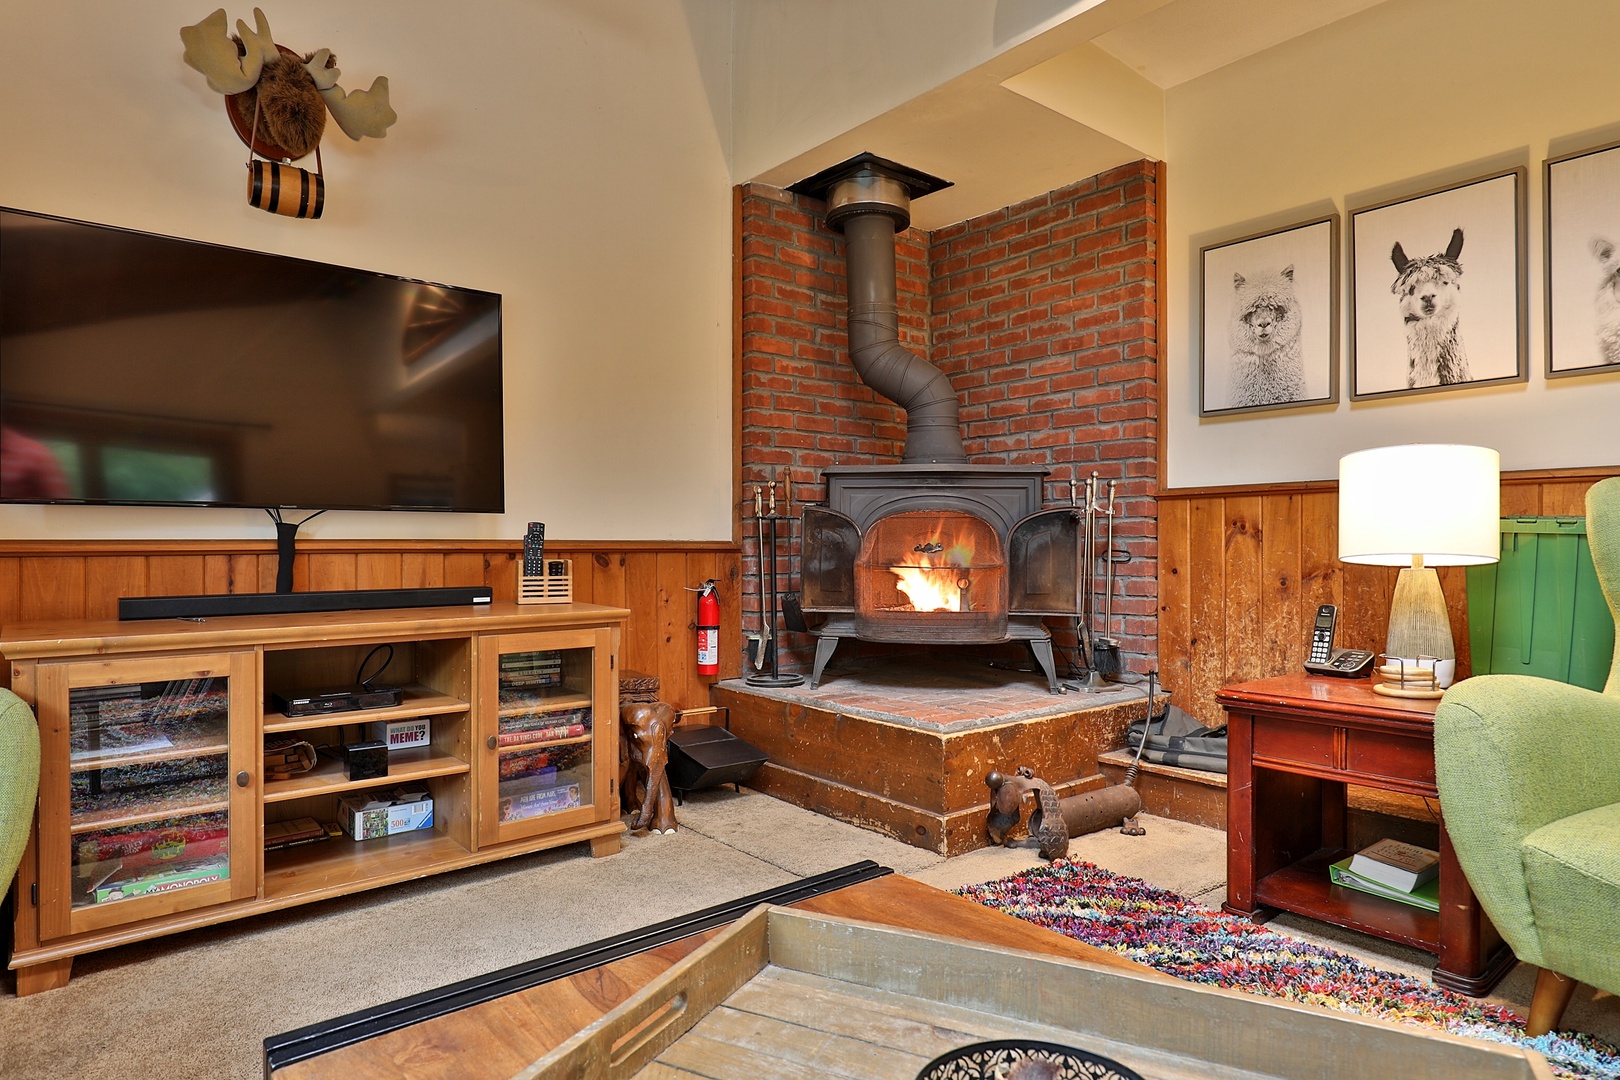 Smart TV and wood burning stove with firewood provided